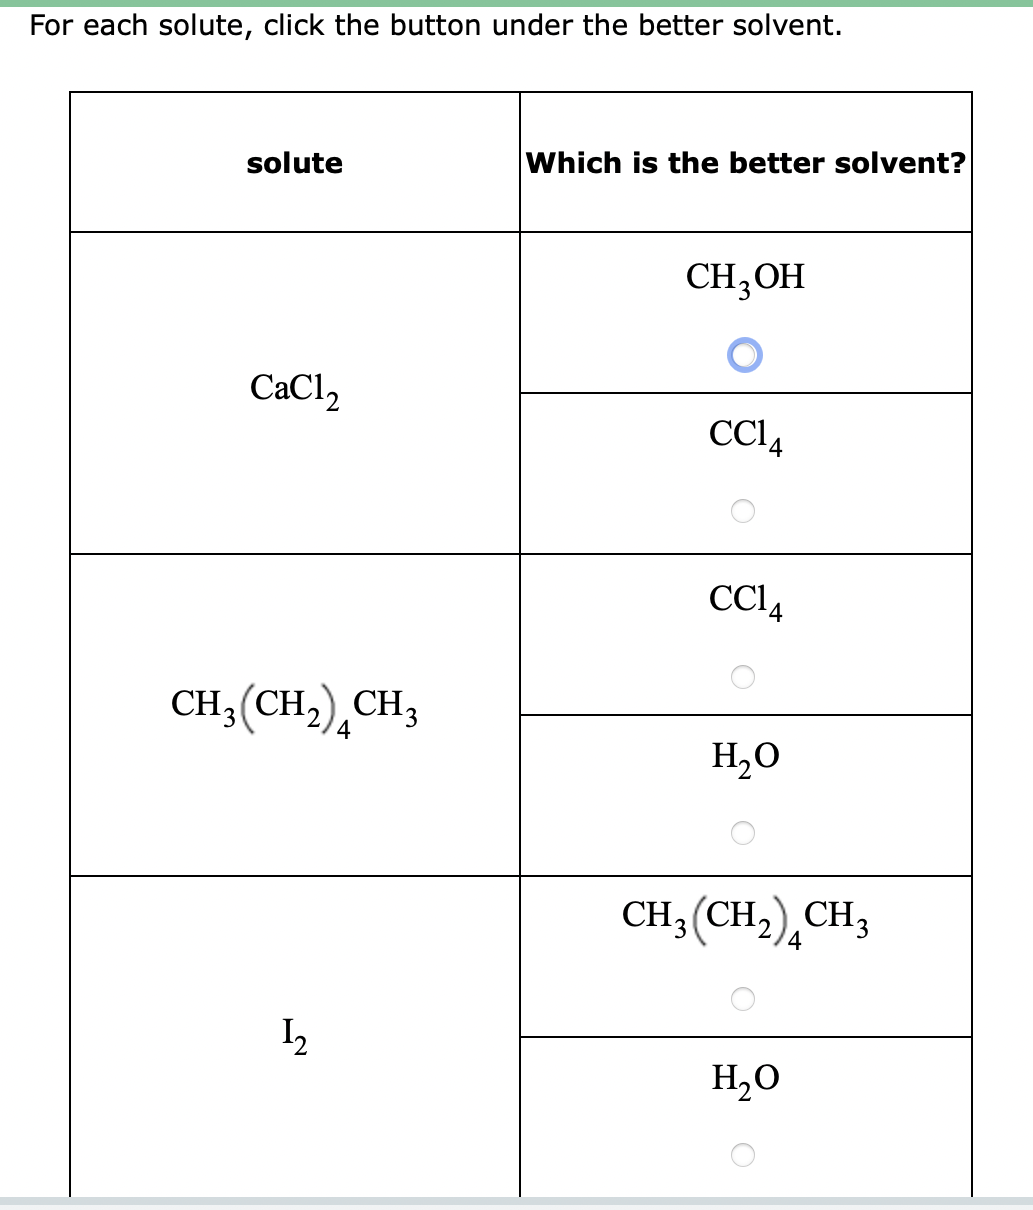 For each solute, click the button under the better solvent.
solute
CaCl₂
CH3(CH₂) CH3
4
1₂
Which is the better solvent?
CH₂OH
CC14
CC14
H₂O
CH3 (CH₂) CH3
H₂O